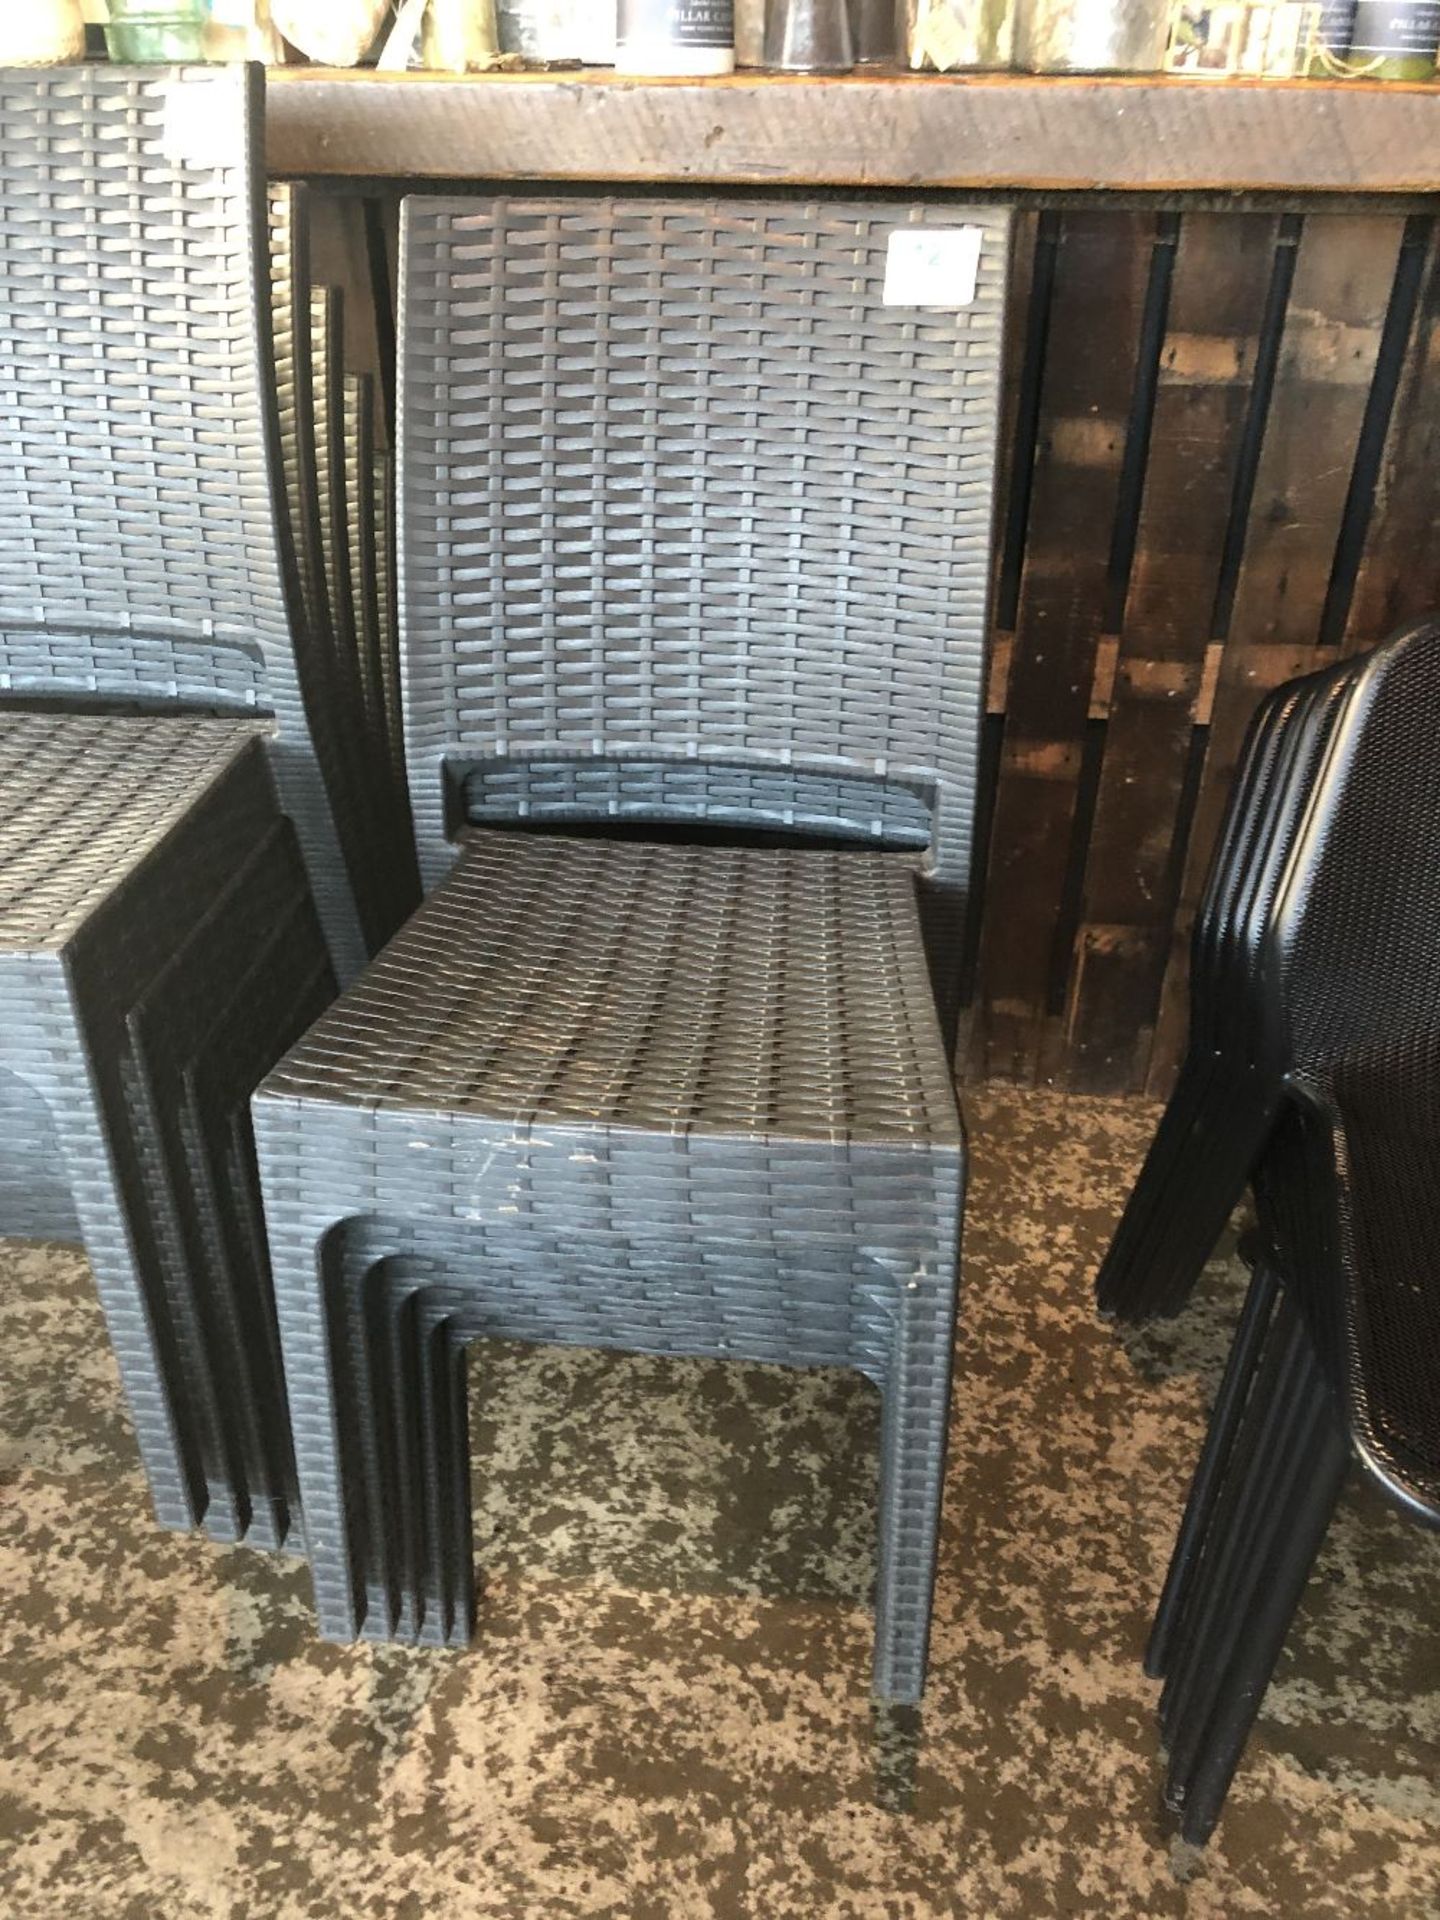 (5) Outdoor Rattan Effect Dining Chairs - Image 2 of 2